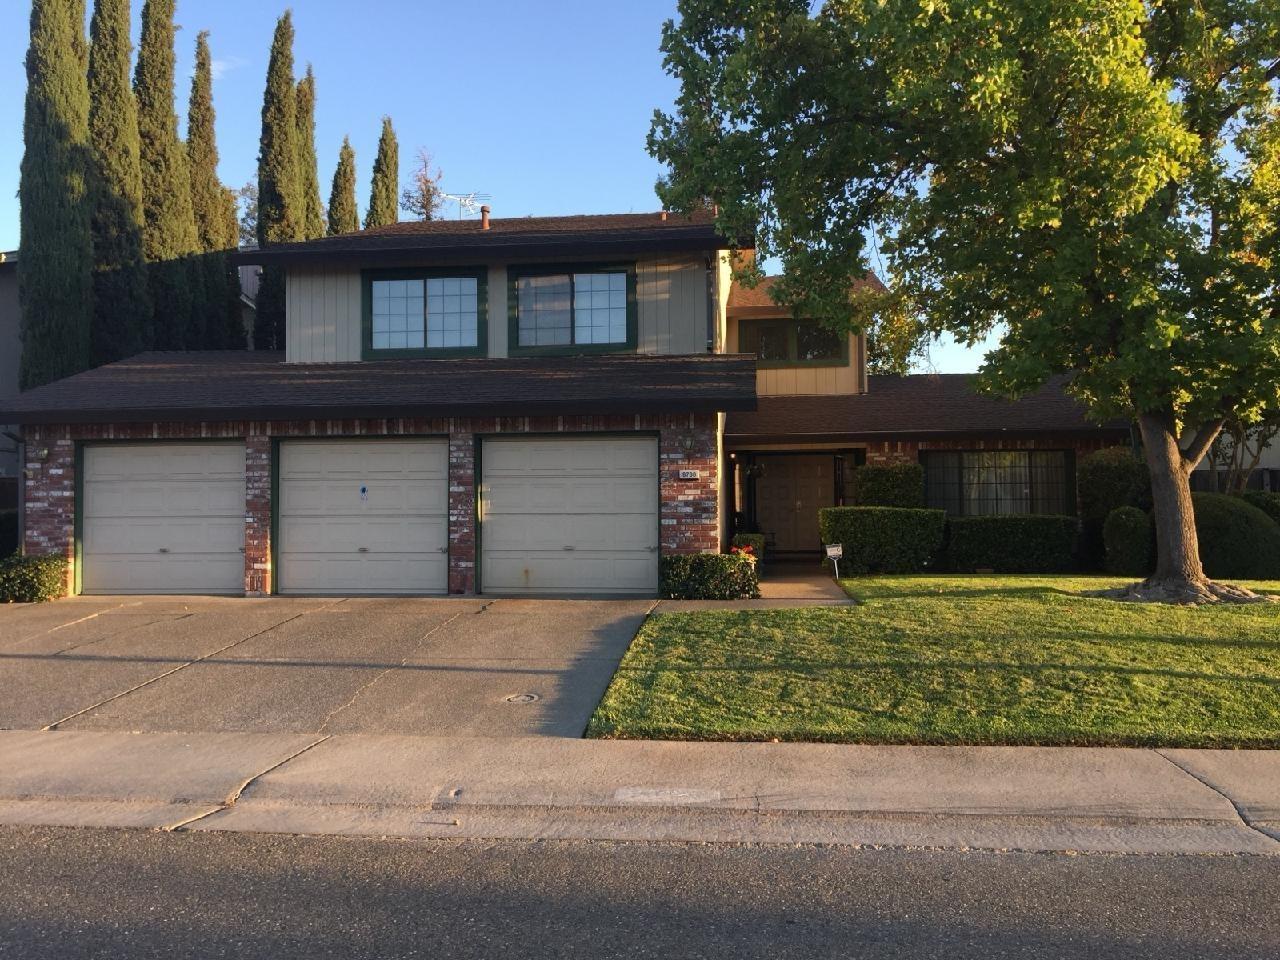 Great Family Home.  5 bedroom 3 full baths 2 story home.  located on a cul-de-sac. This home has lot